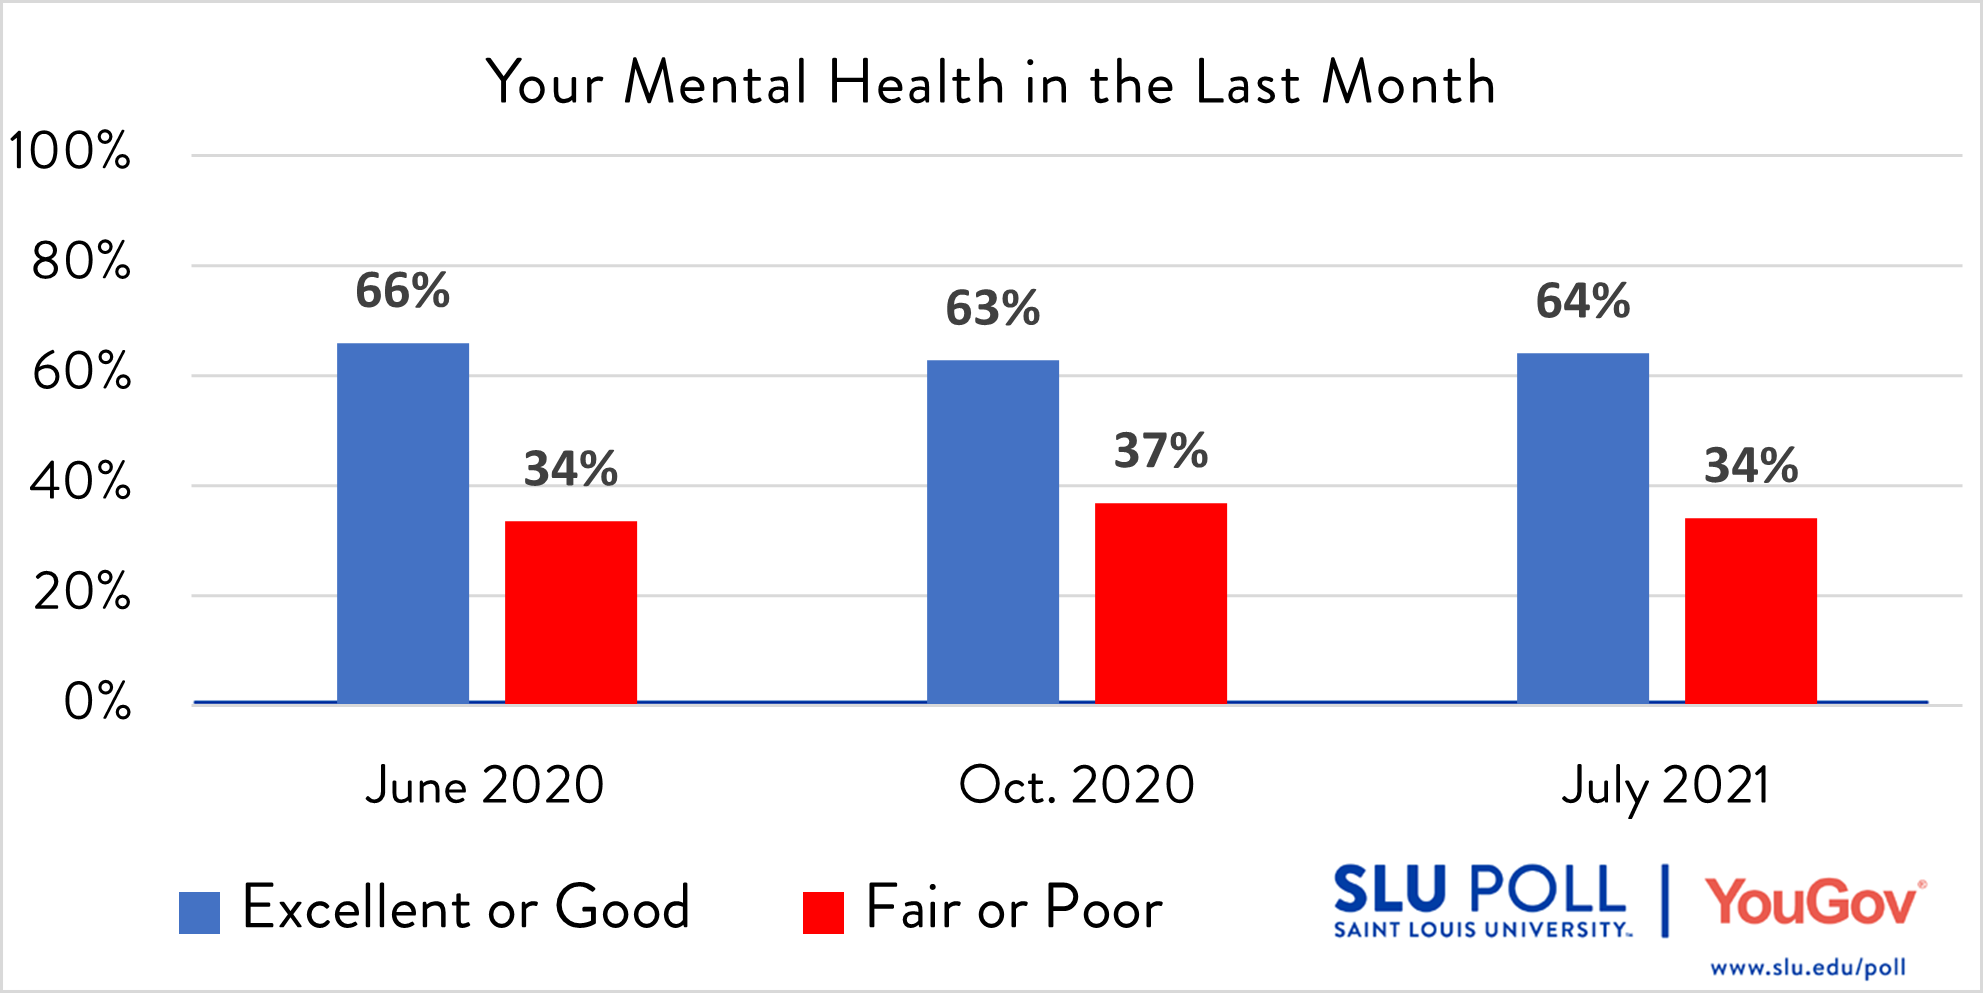 How would you rate the following…Your mental health in the last month? - Excellent: 24% - Good: 41% - Fair: 25% - Poor: 10% - Not sure: 2% Subsample Question: The sample size for this question is 477. The margin of error for the full results for the above question is ± 6.02%.